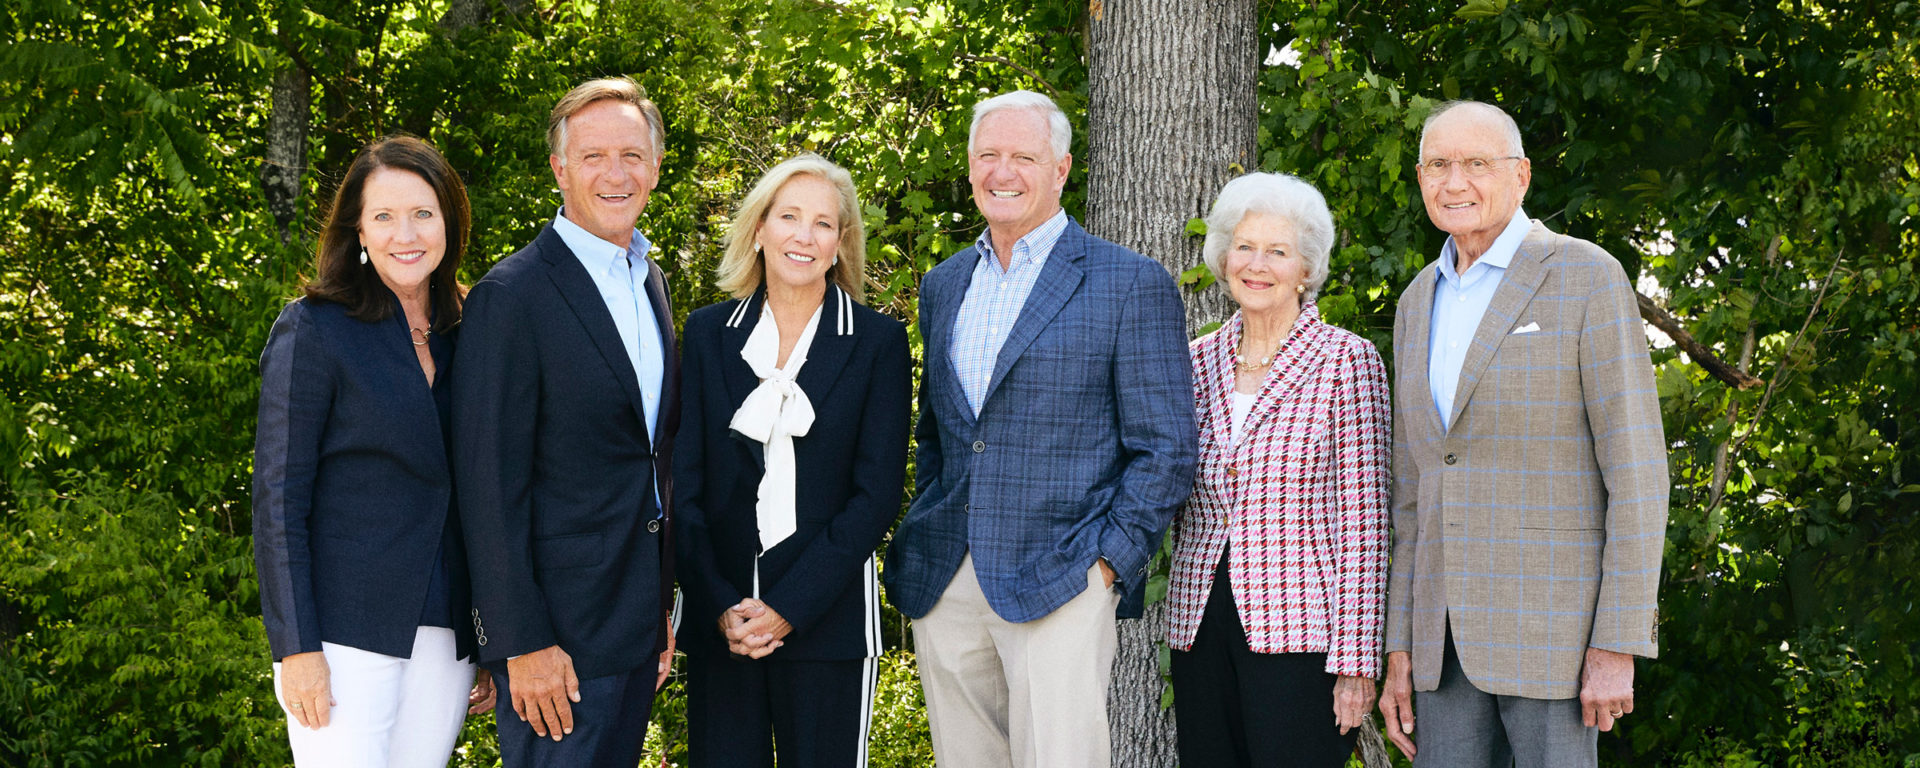 The Haslam family pictured outdoors